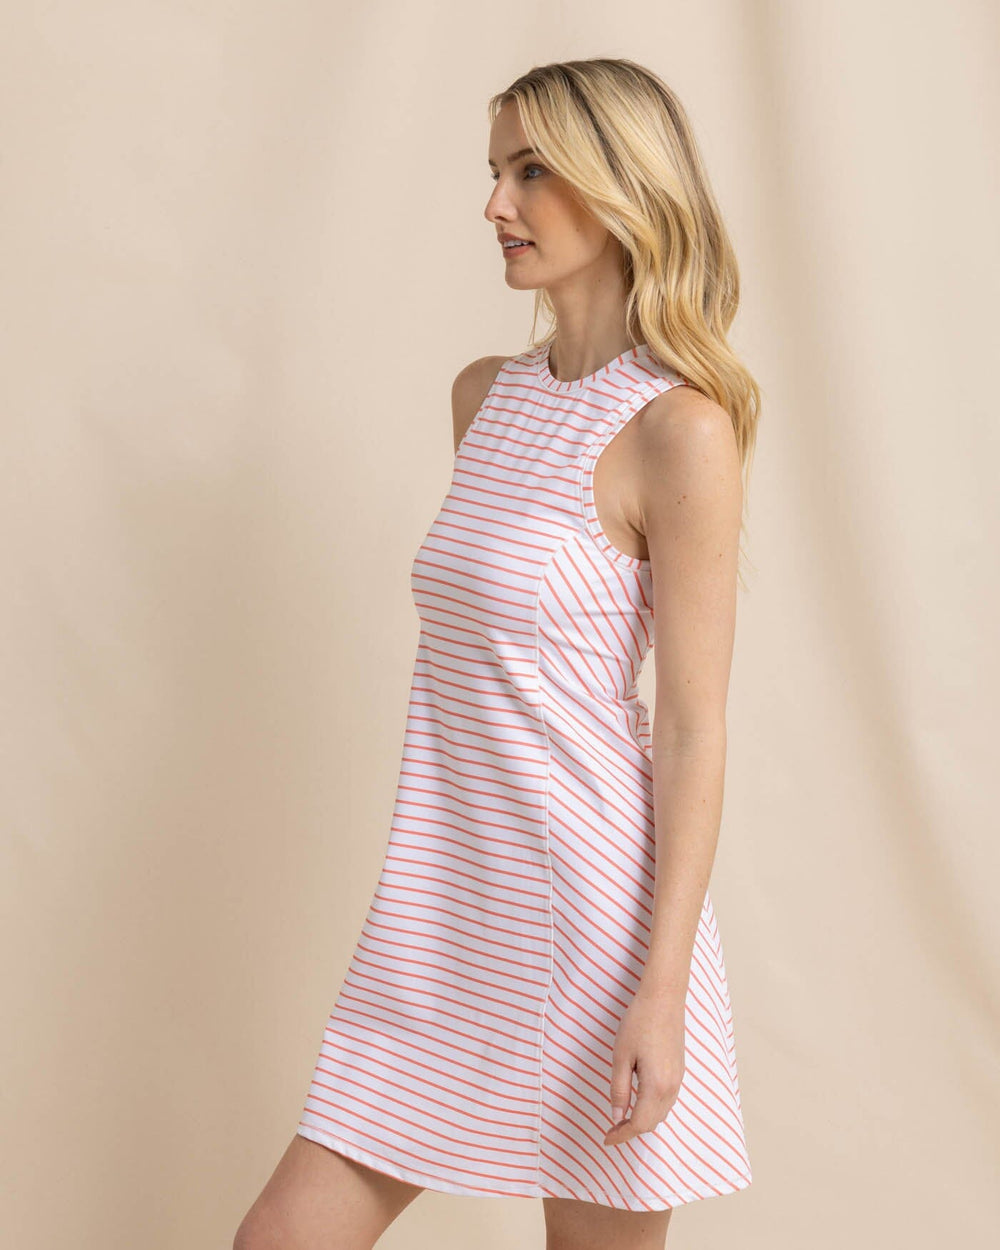 The front view of the Southern Tide Lyllee Striped Performance Dress by Southern Tide - Classic White